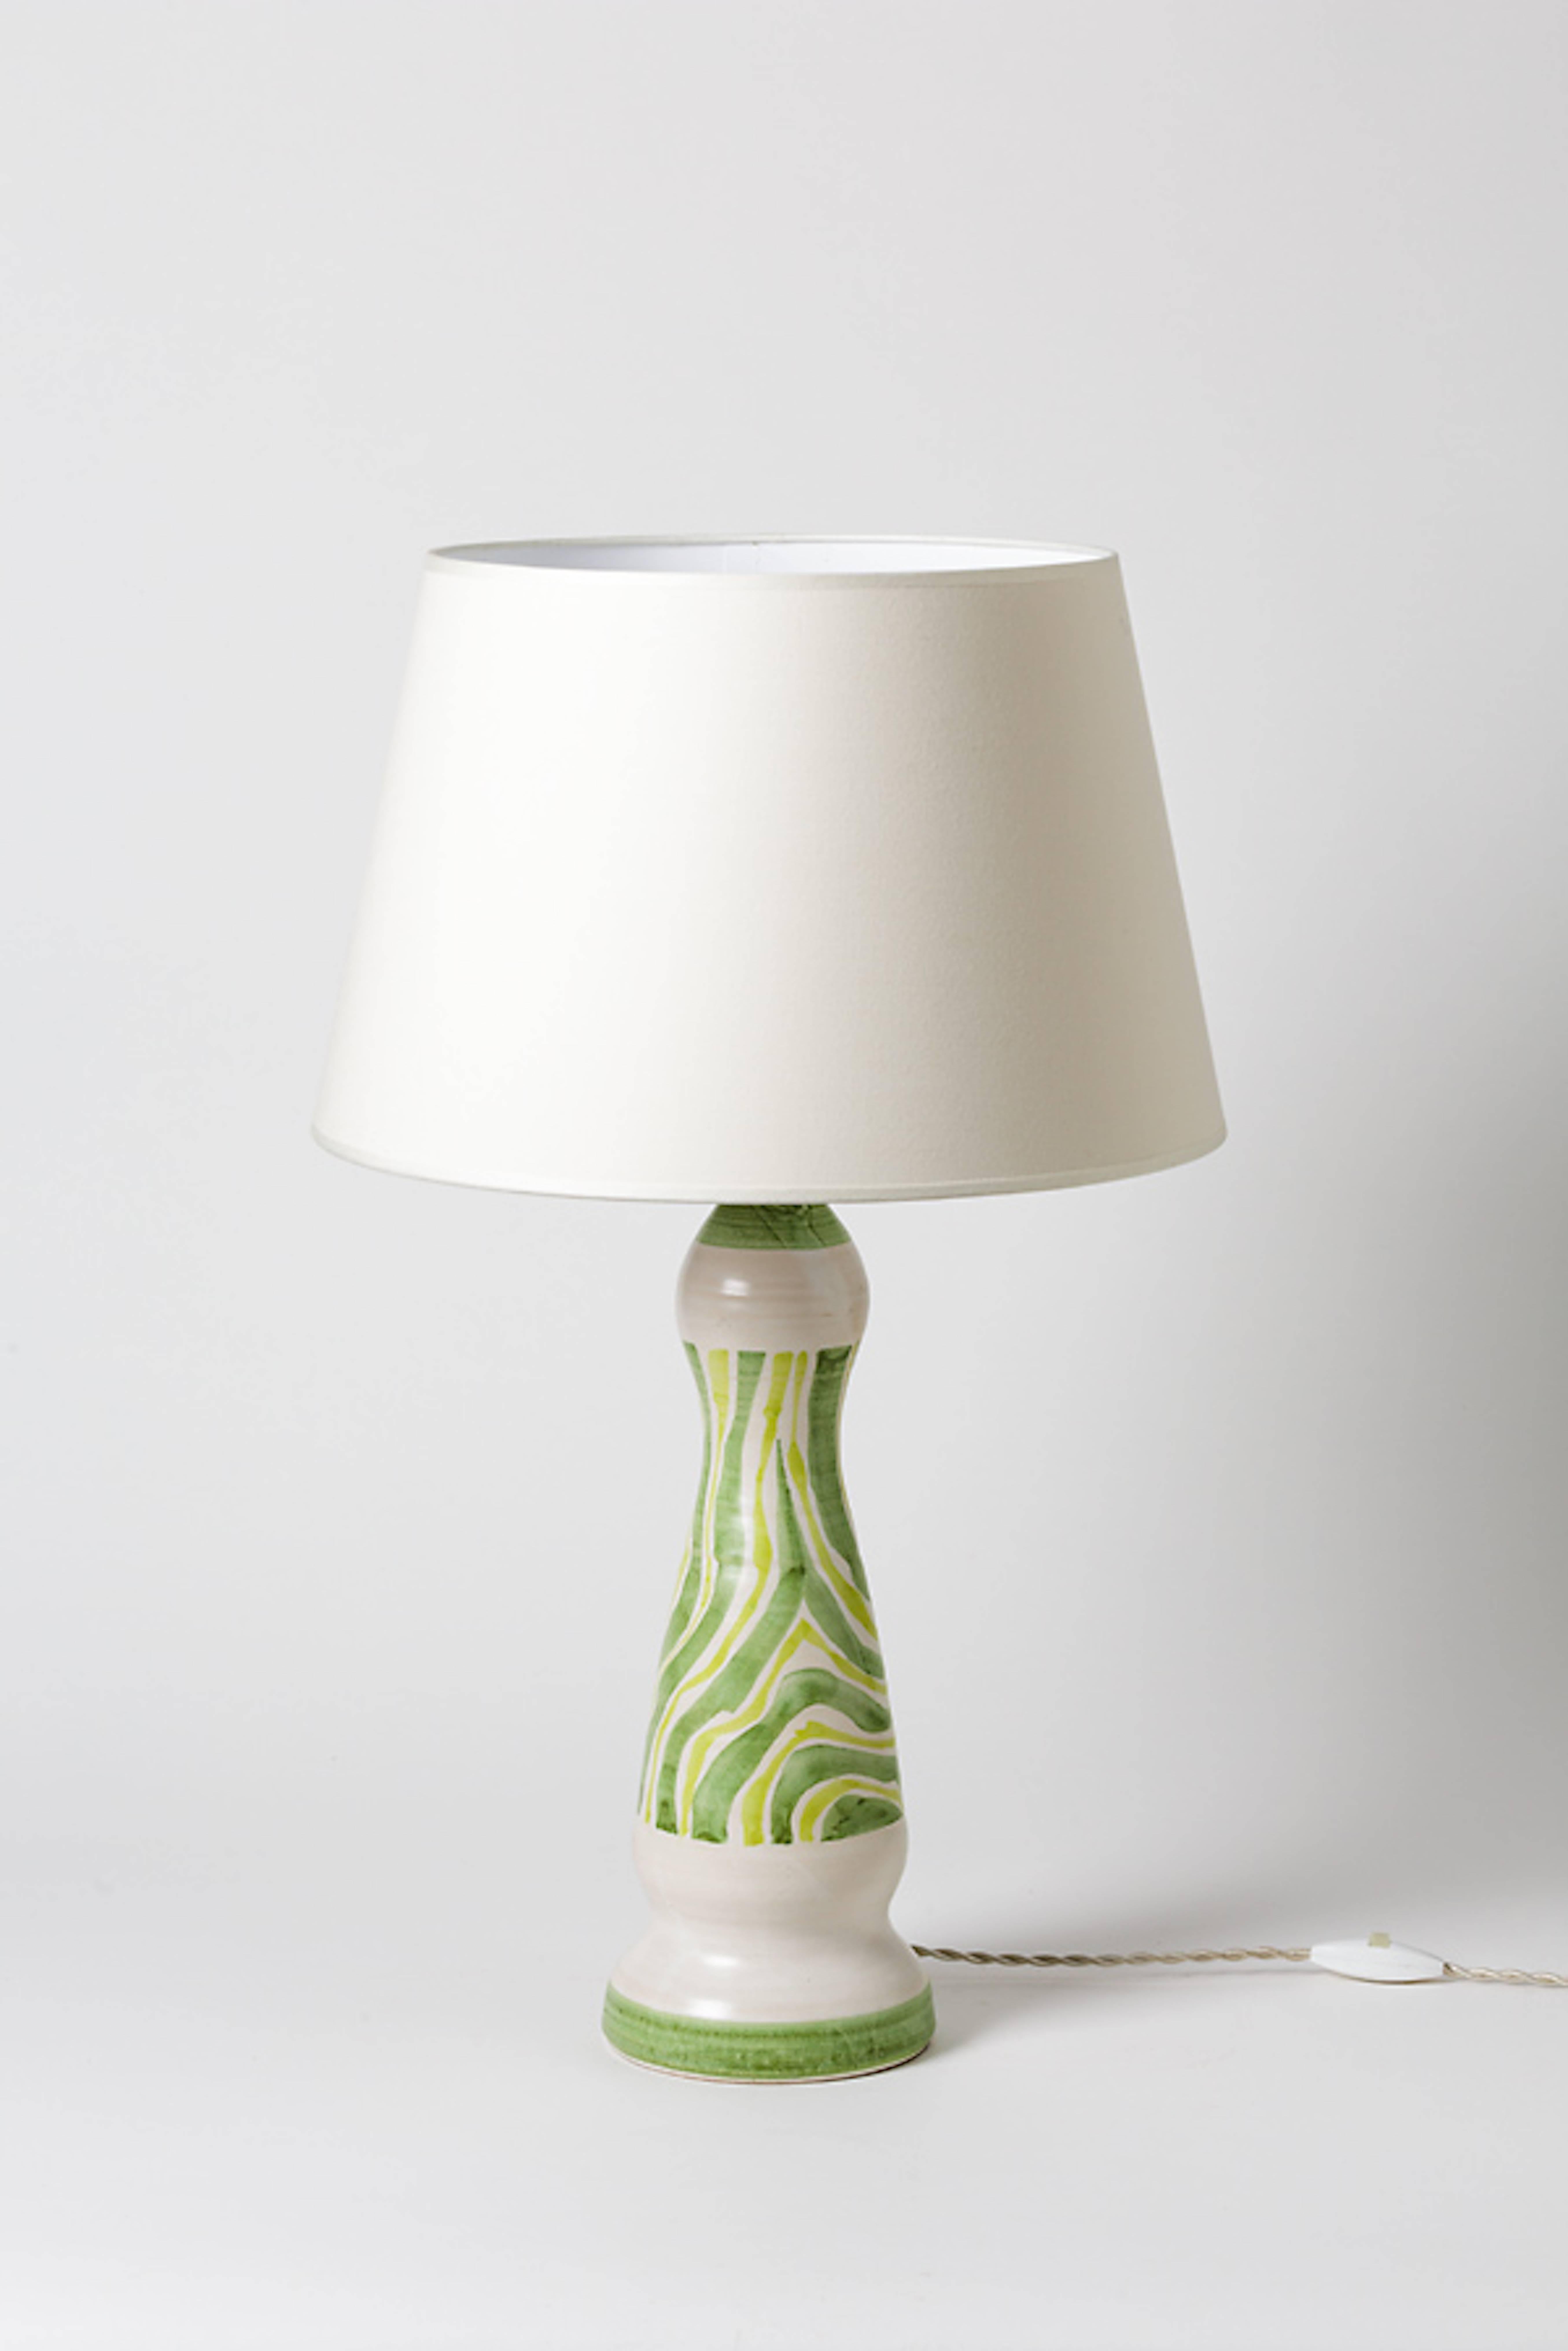 Robert Deblander

Original and elegant ceramic table lamp with white and green abstract decoration.

Signed under the base.

circa 1960.
Unique piece.

Sold without lampshade

Height without lampshade 18' inch.
Height without electrical